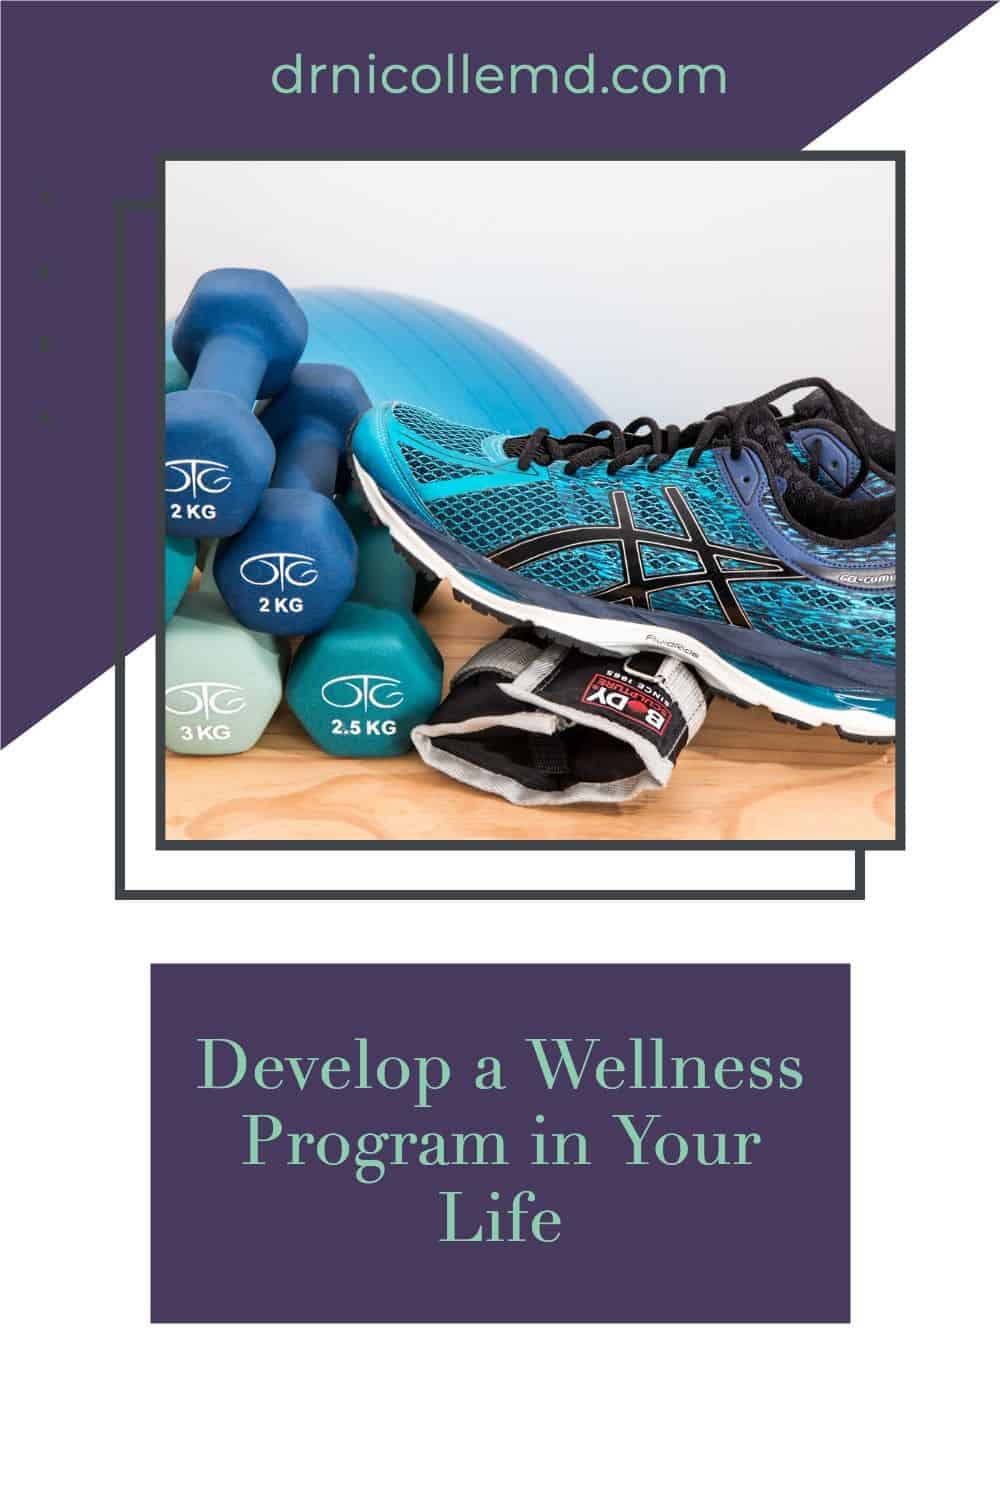 How to Develop a Wellness Program in Your Life